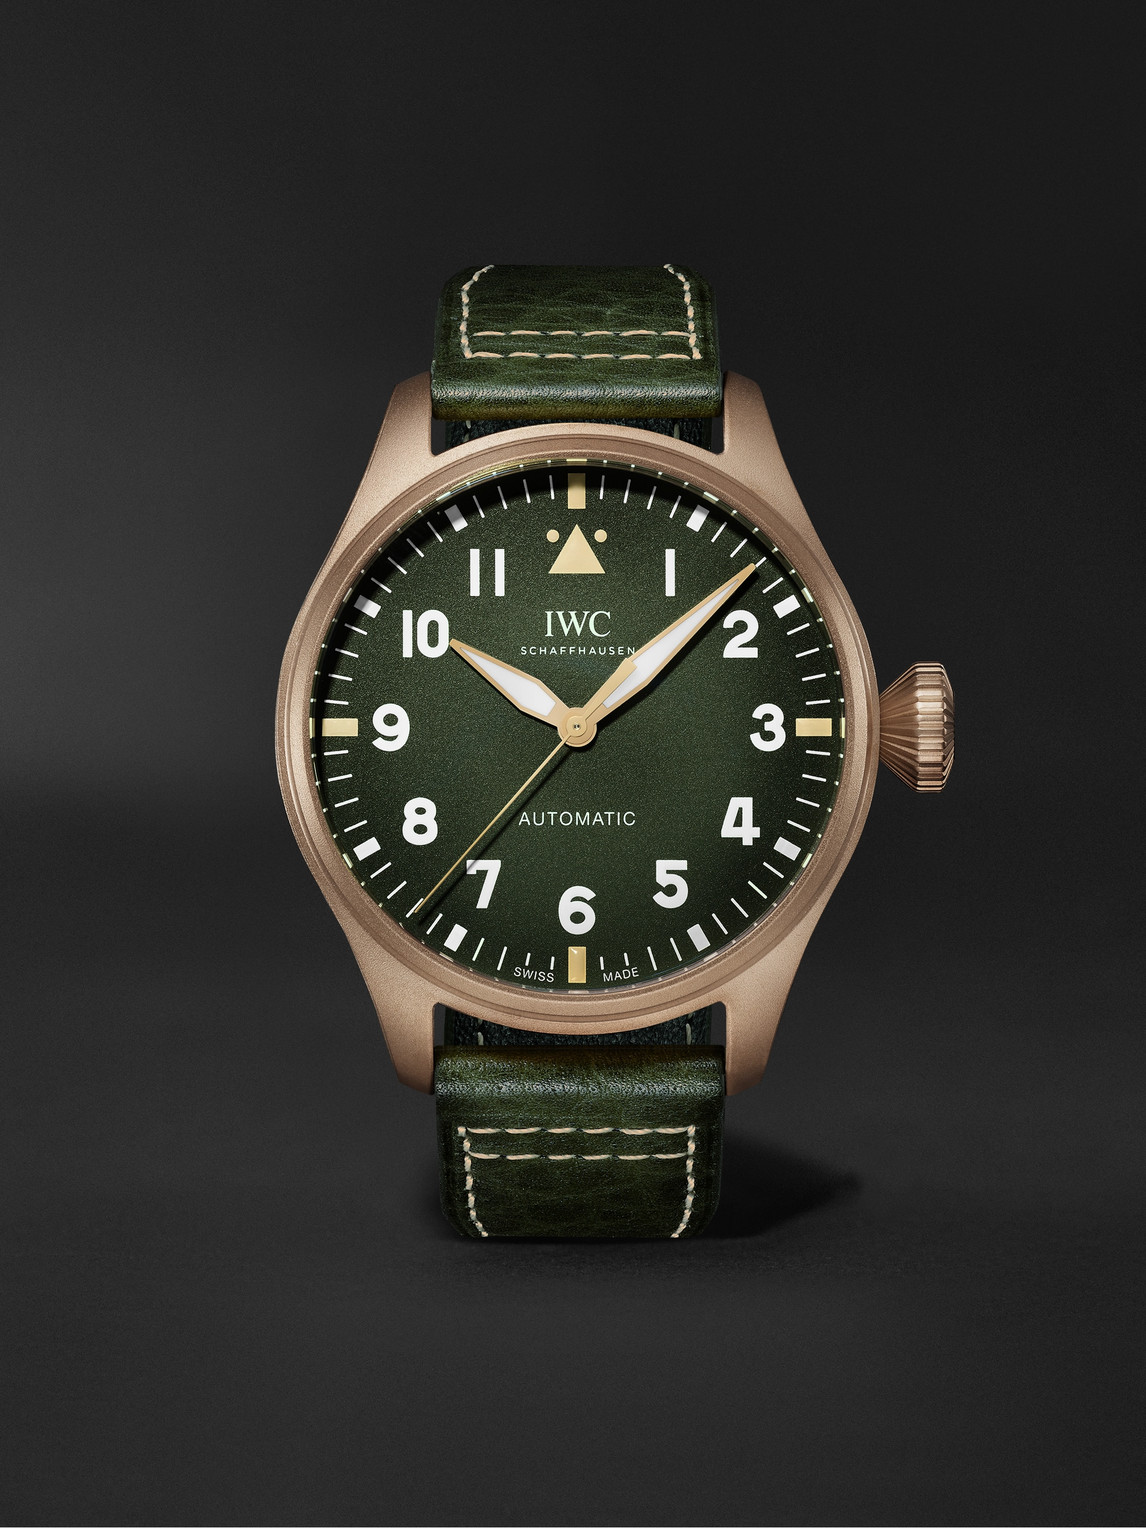 Big Pilot's Spitfire Automatic 43mm Bronze and Leather Watch, Ref. No. IW329702